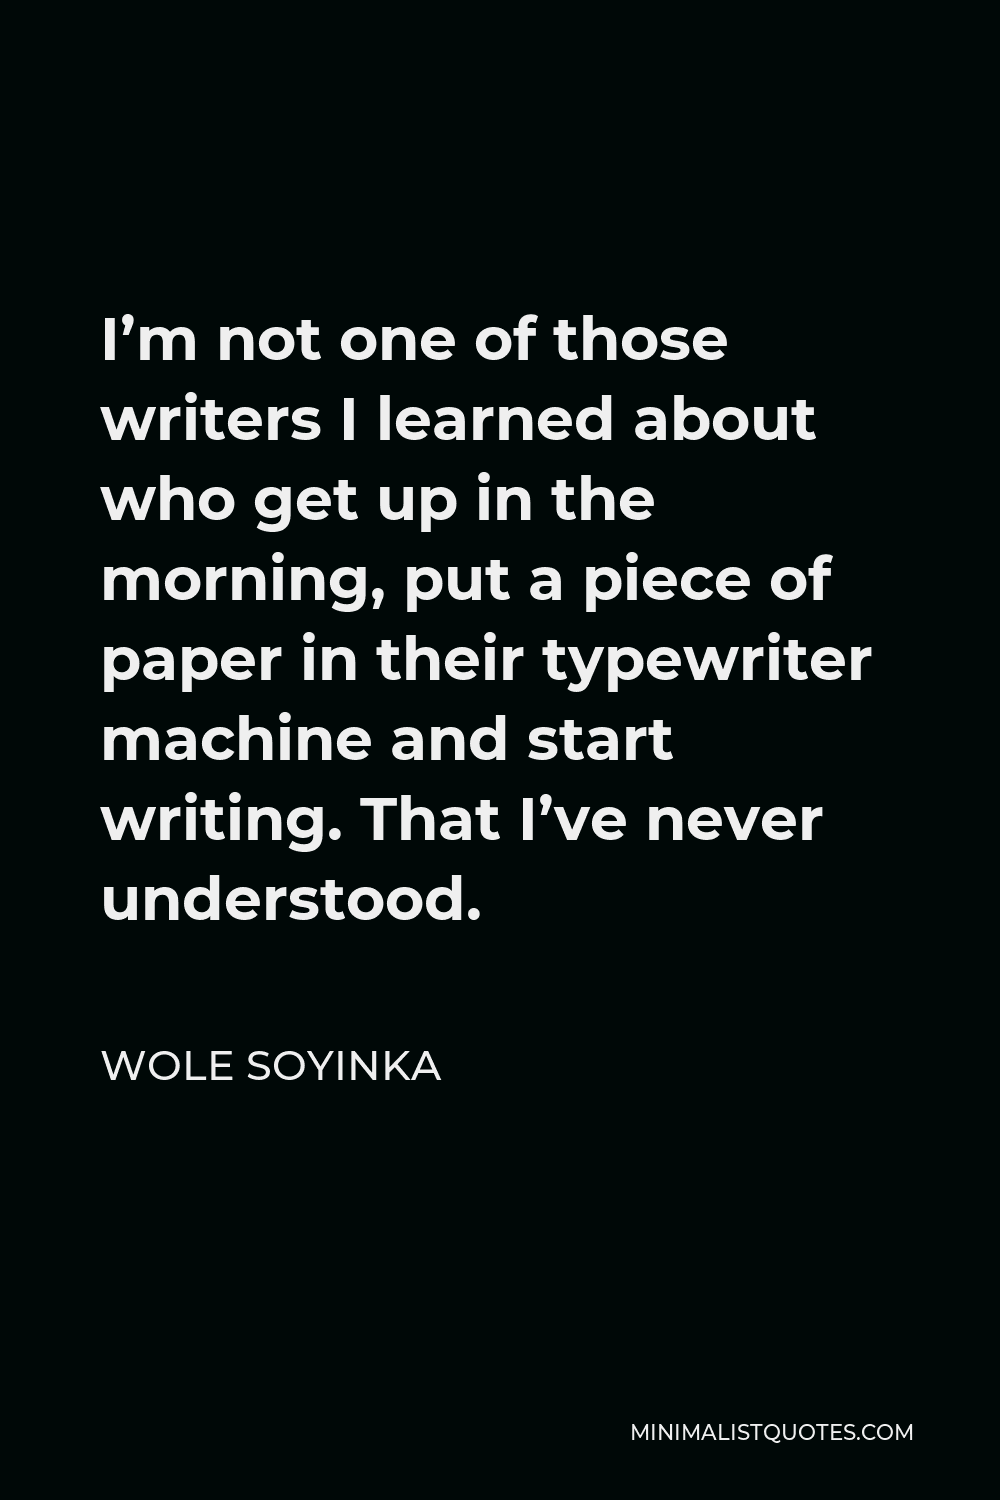 Wole Soyinka Quote - I’m not one of those writers I learned about who get up in the morning, put a piece of paper in their typewriter machine and start writing. That I’ve never understood.